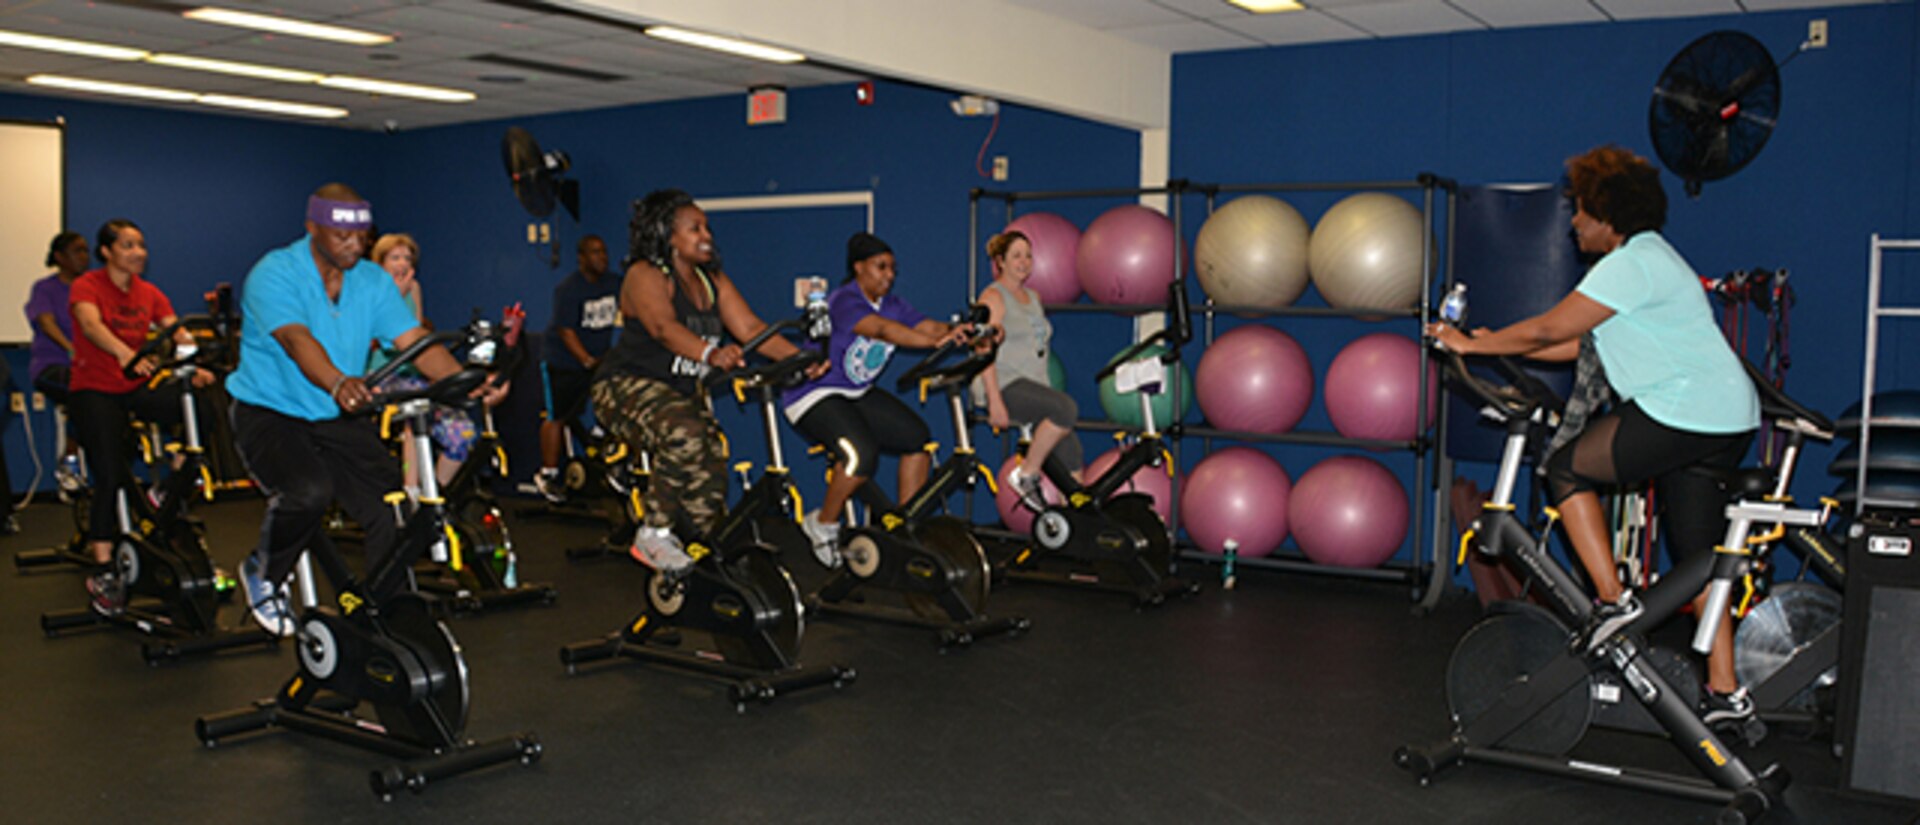 Spin Instructor leads class